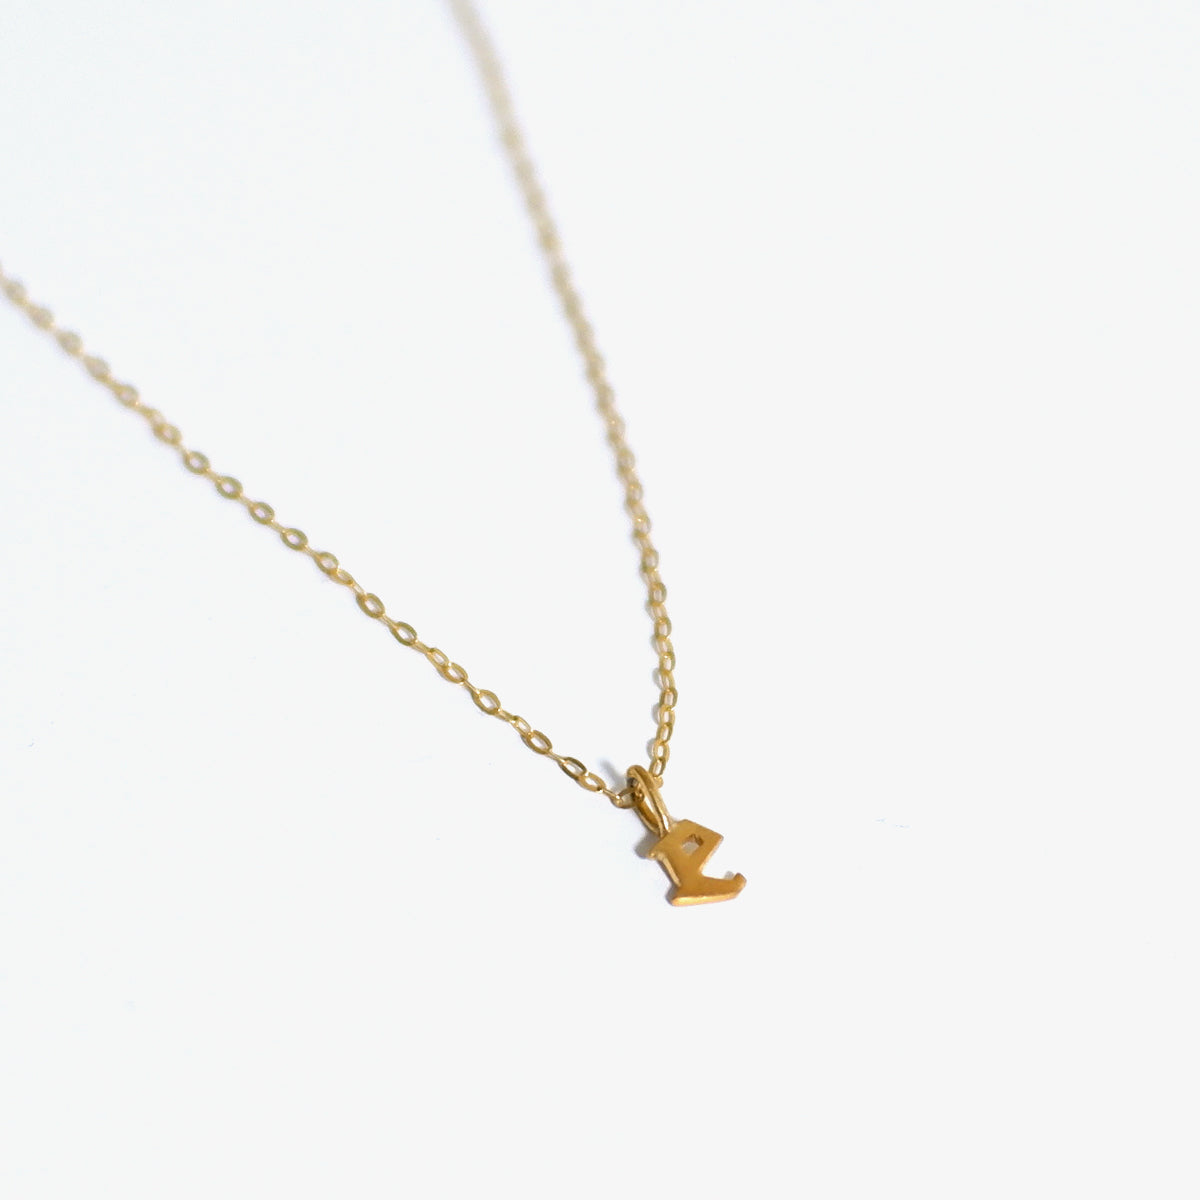 The Tiny Initial Pendant in Solid Gold